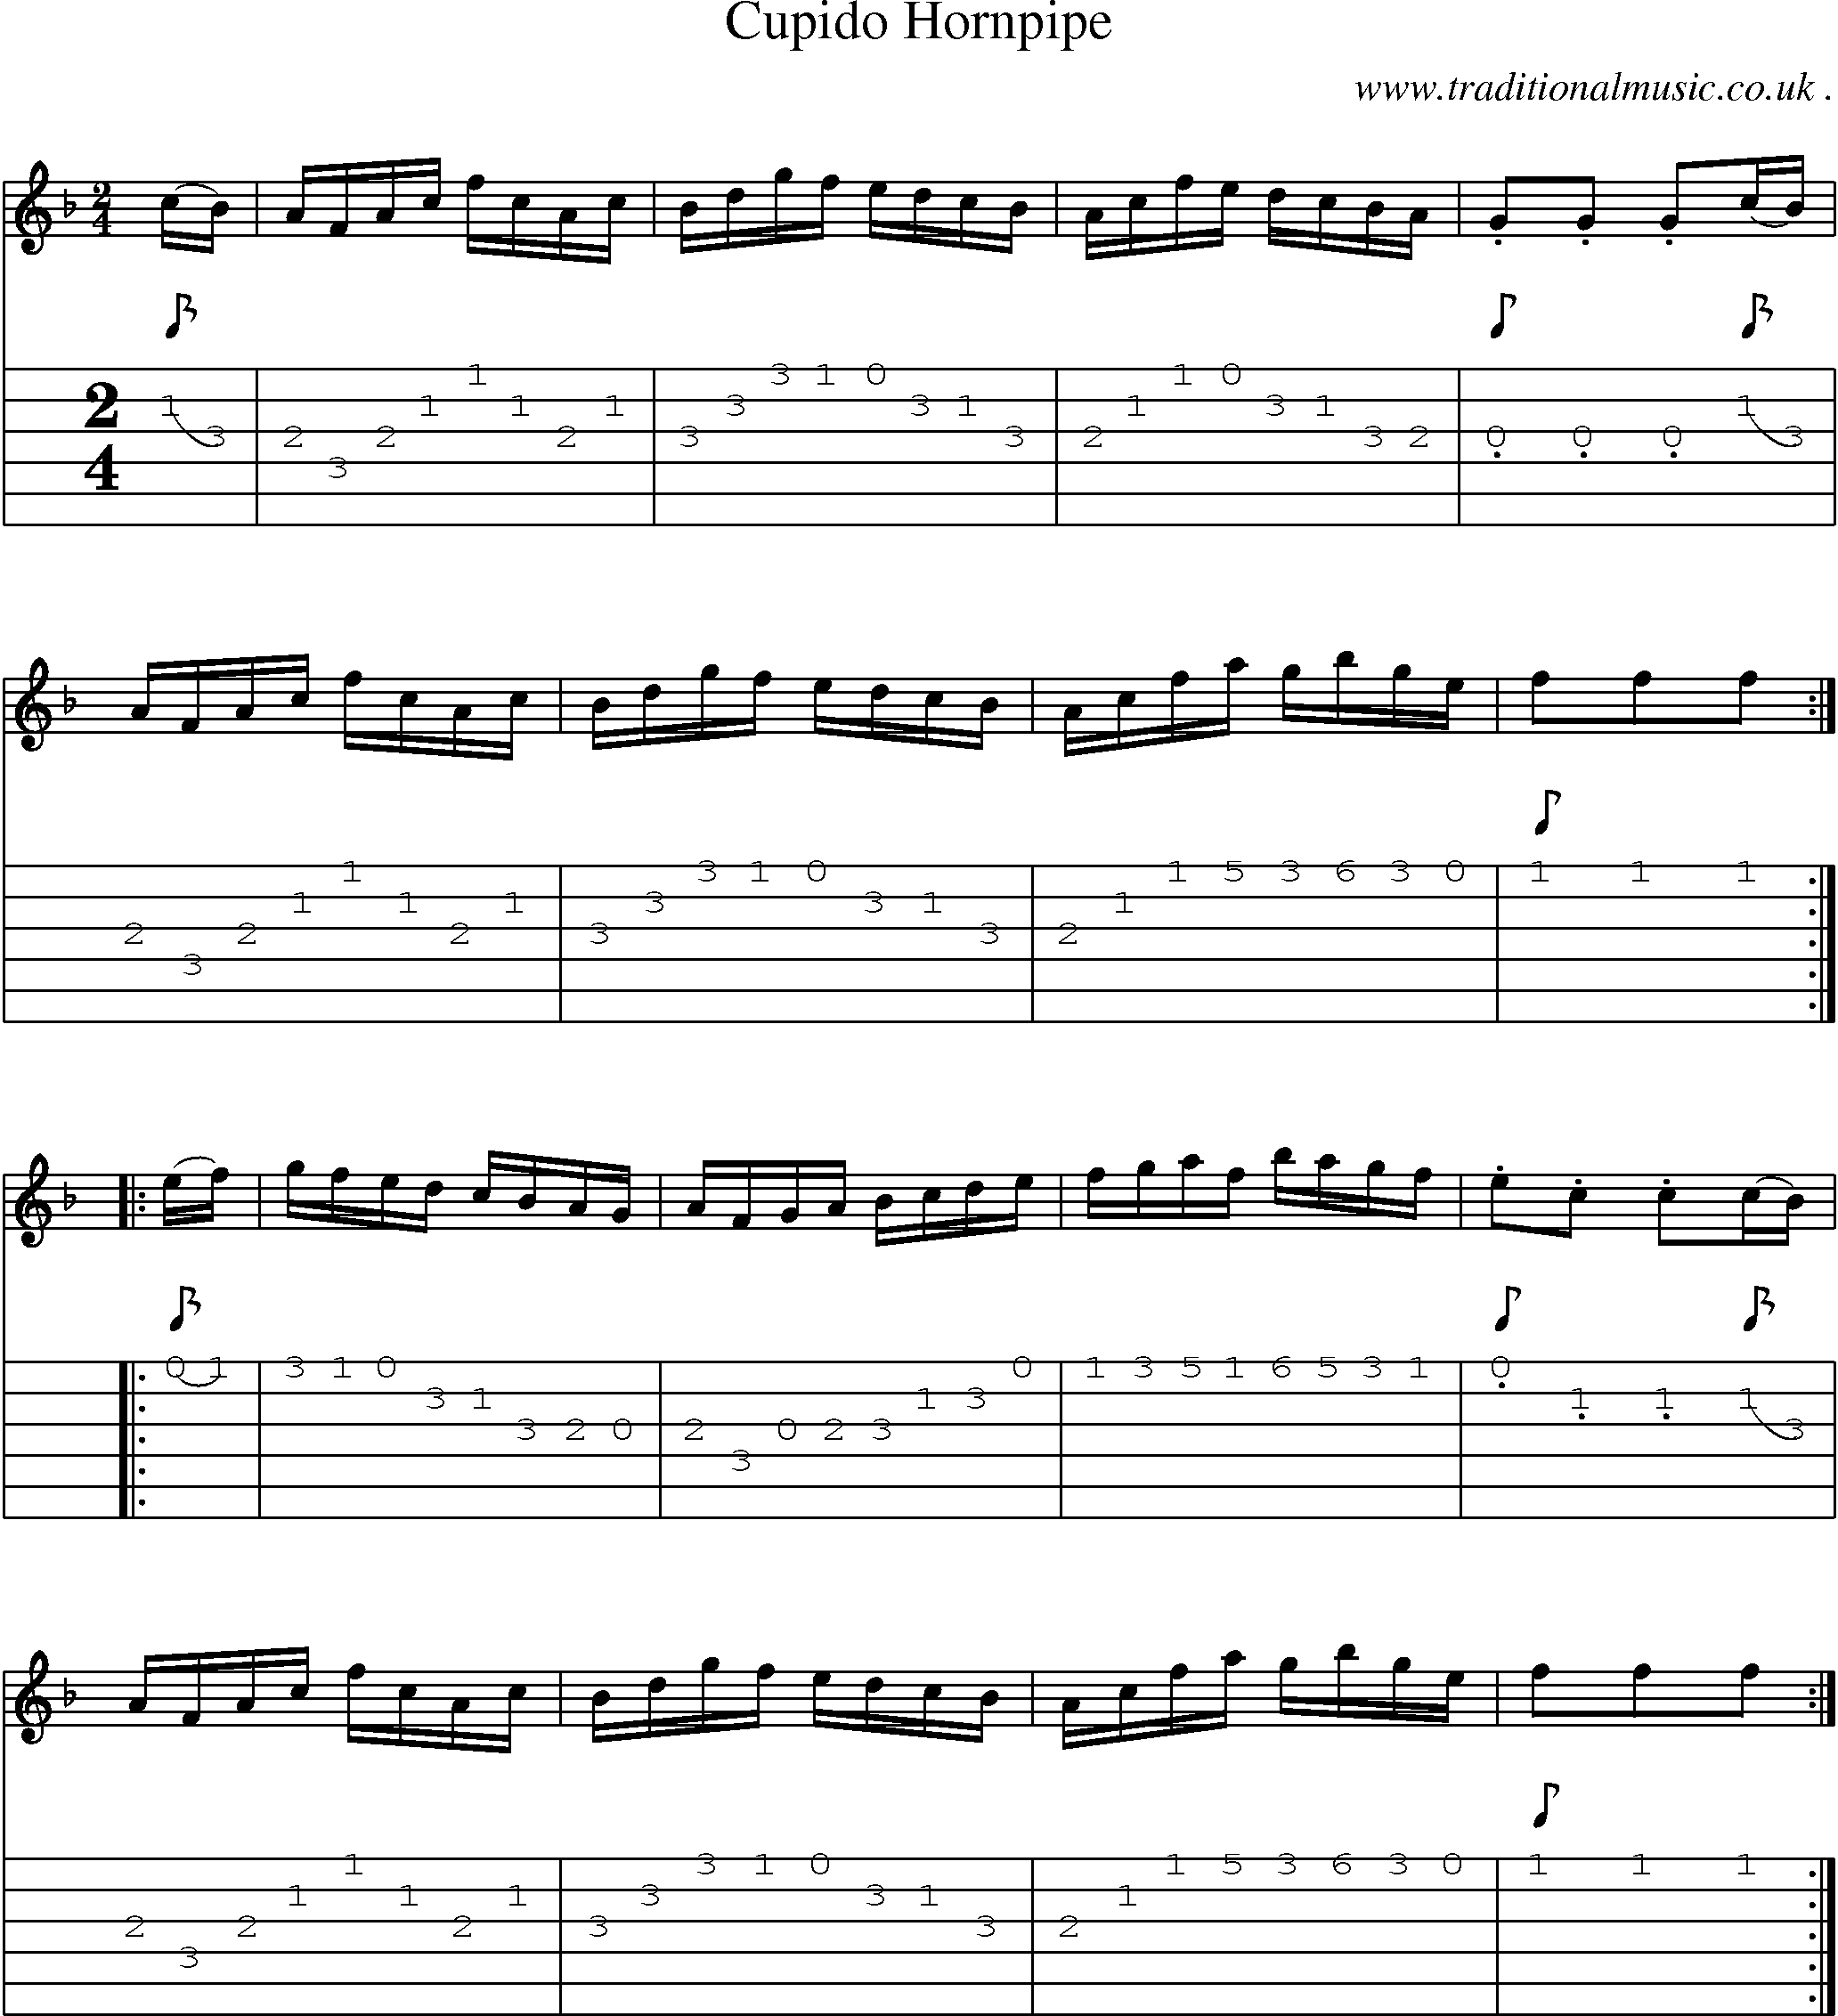 Sheet-Music and Guitar Tabs for Cupido Hornpipe